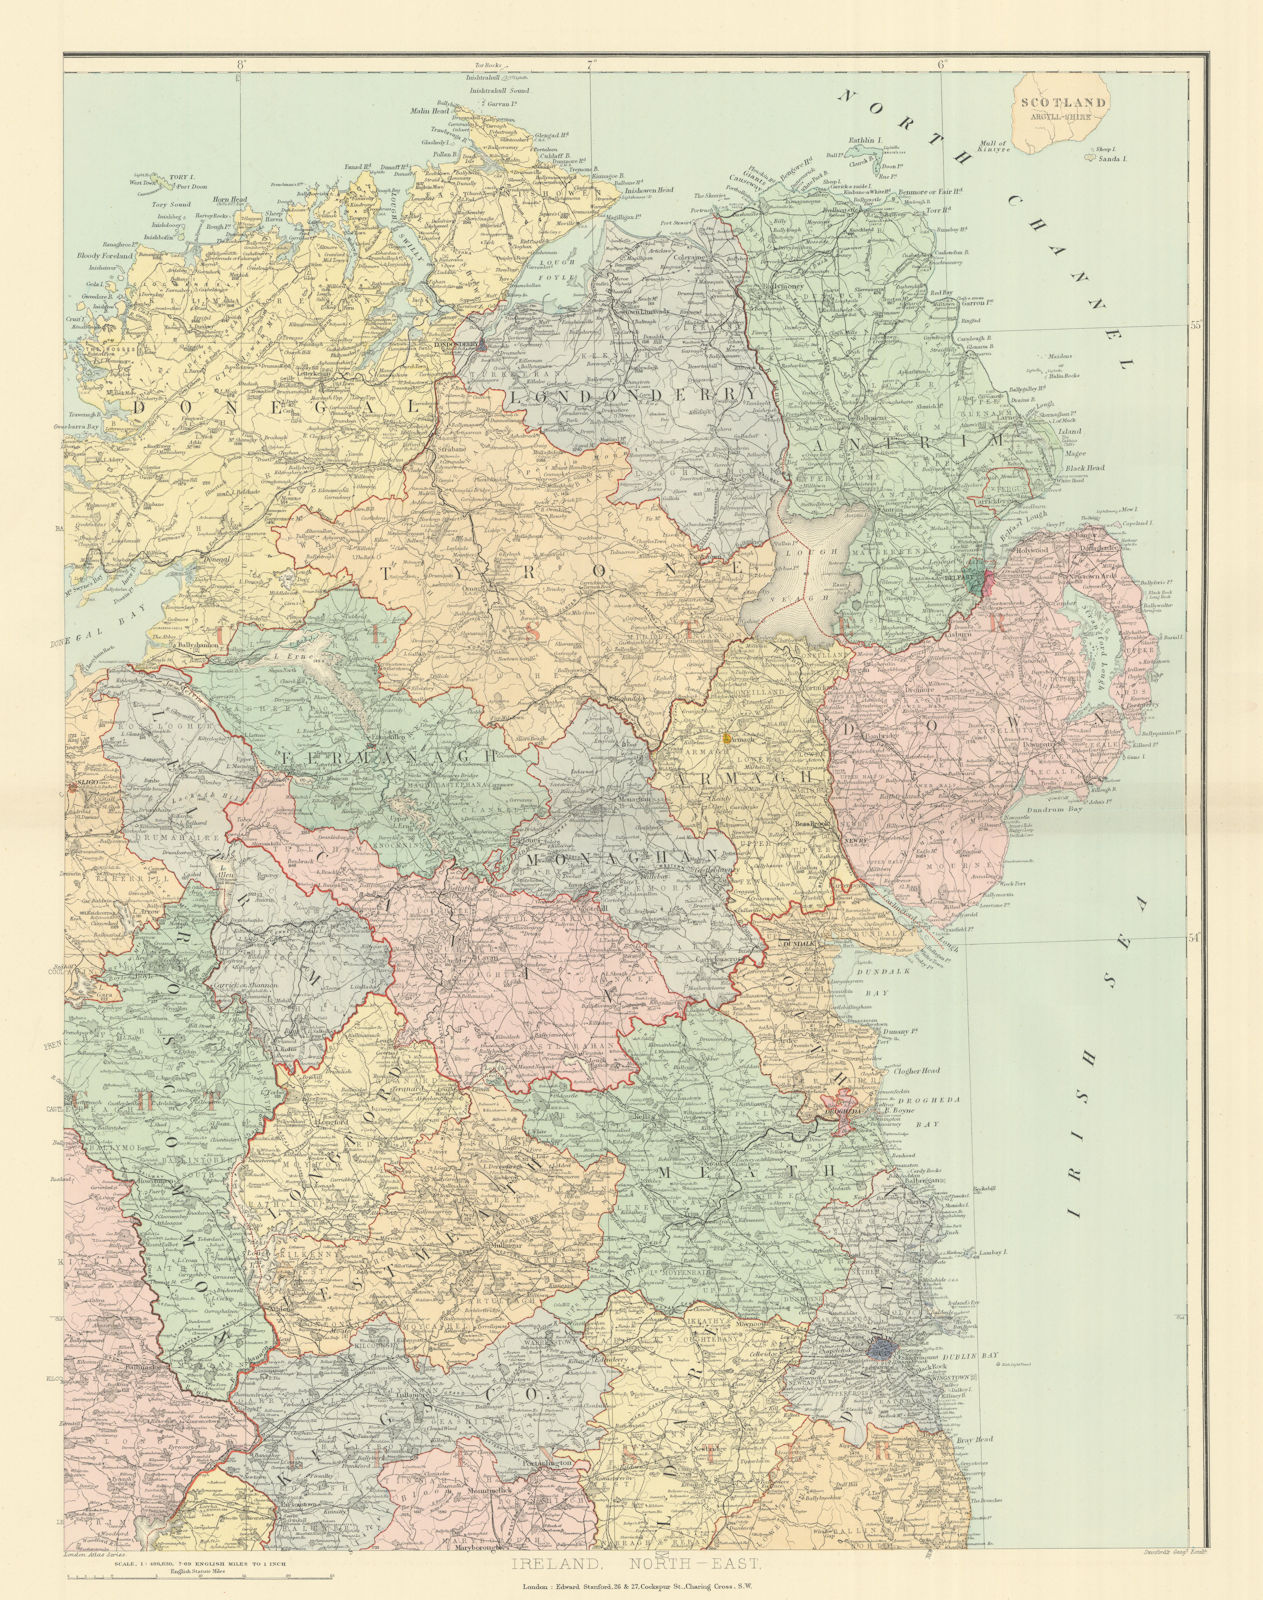 Ireland north-east Ulster Down Antrim Armagh Londonderry &c. STANFORD 1894 map